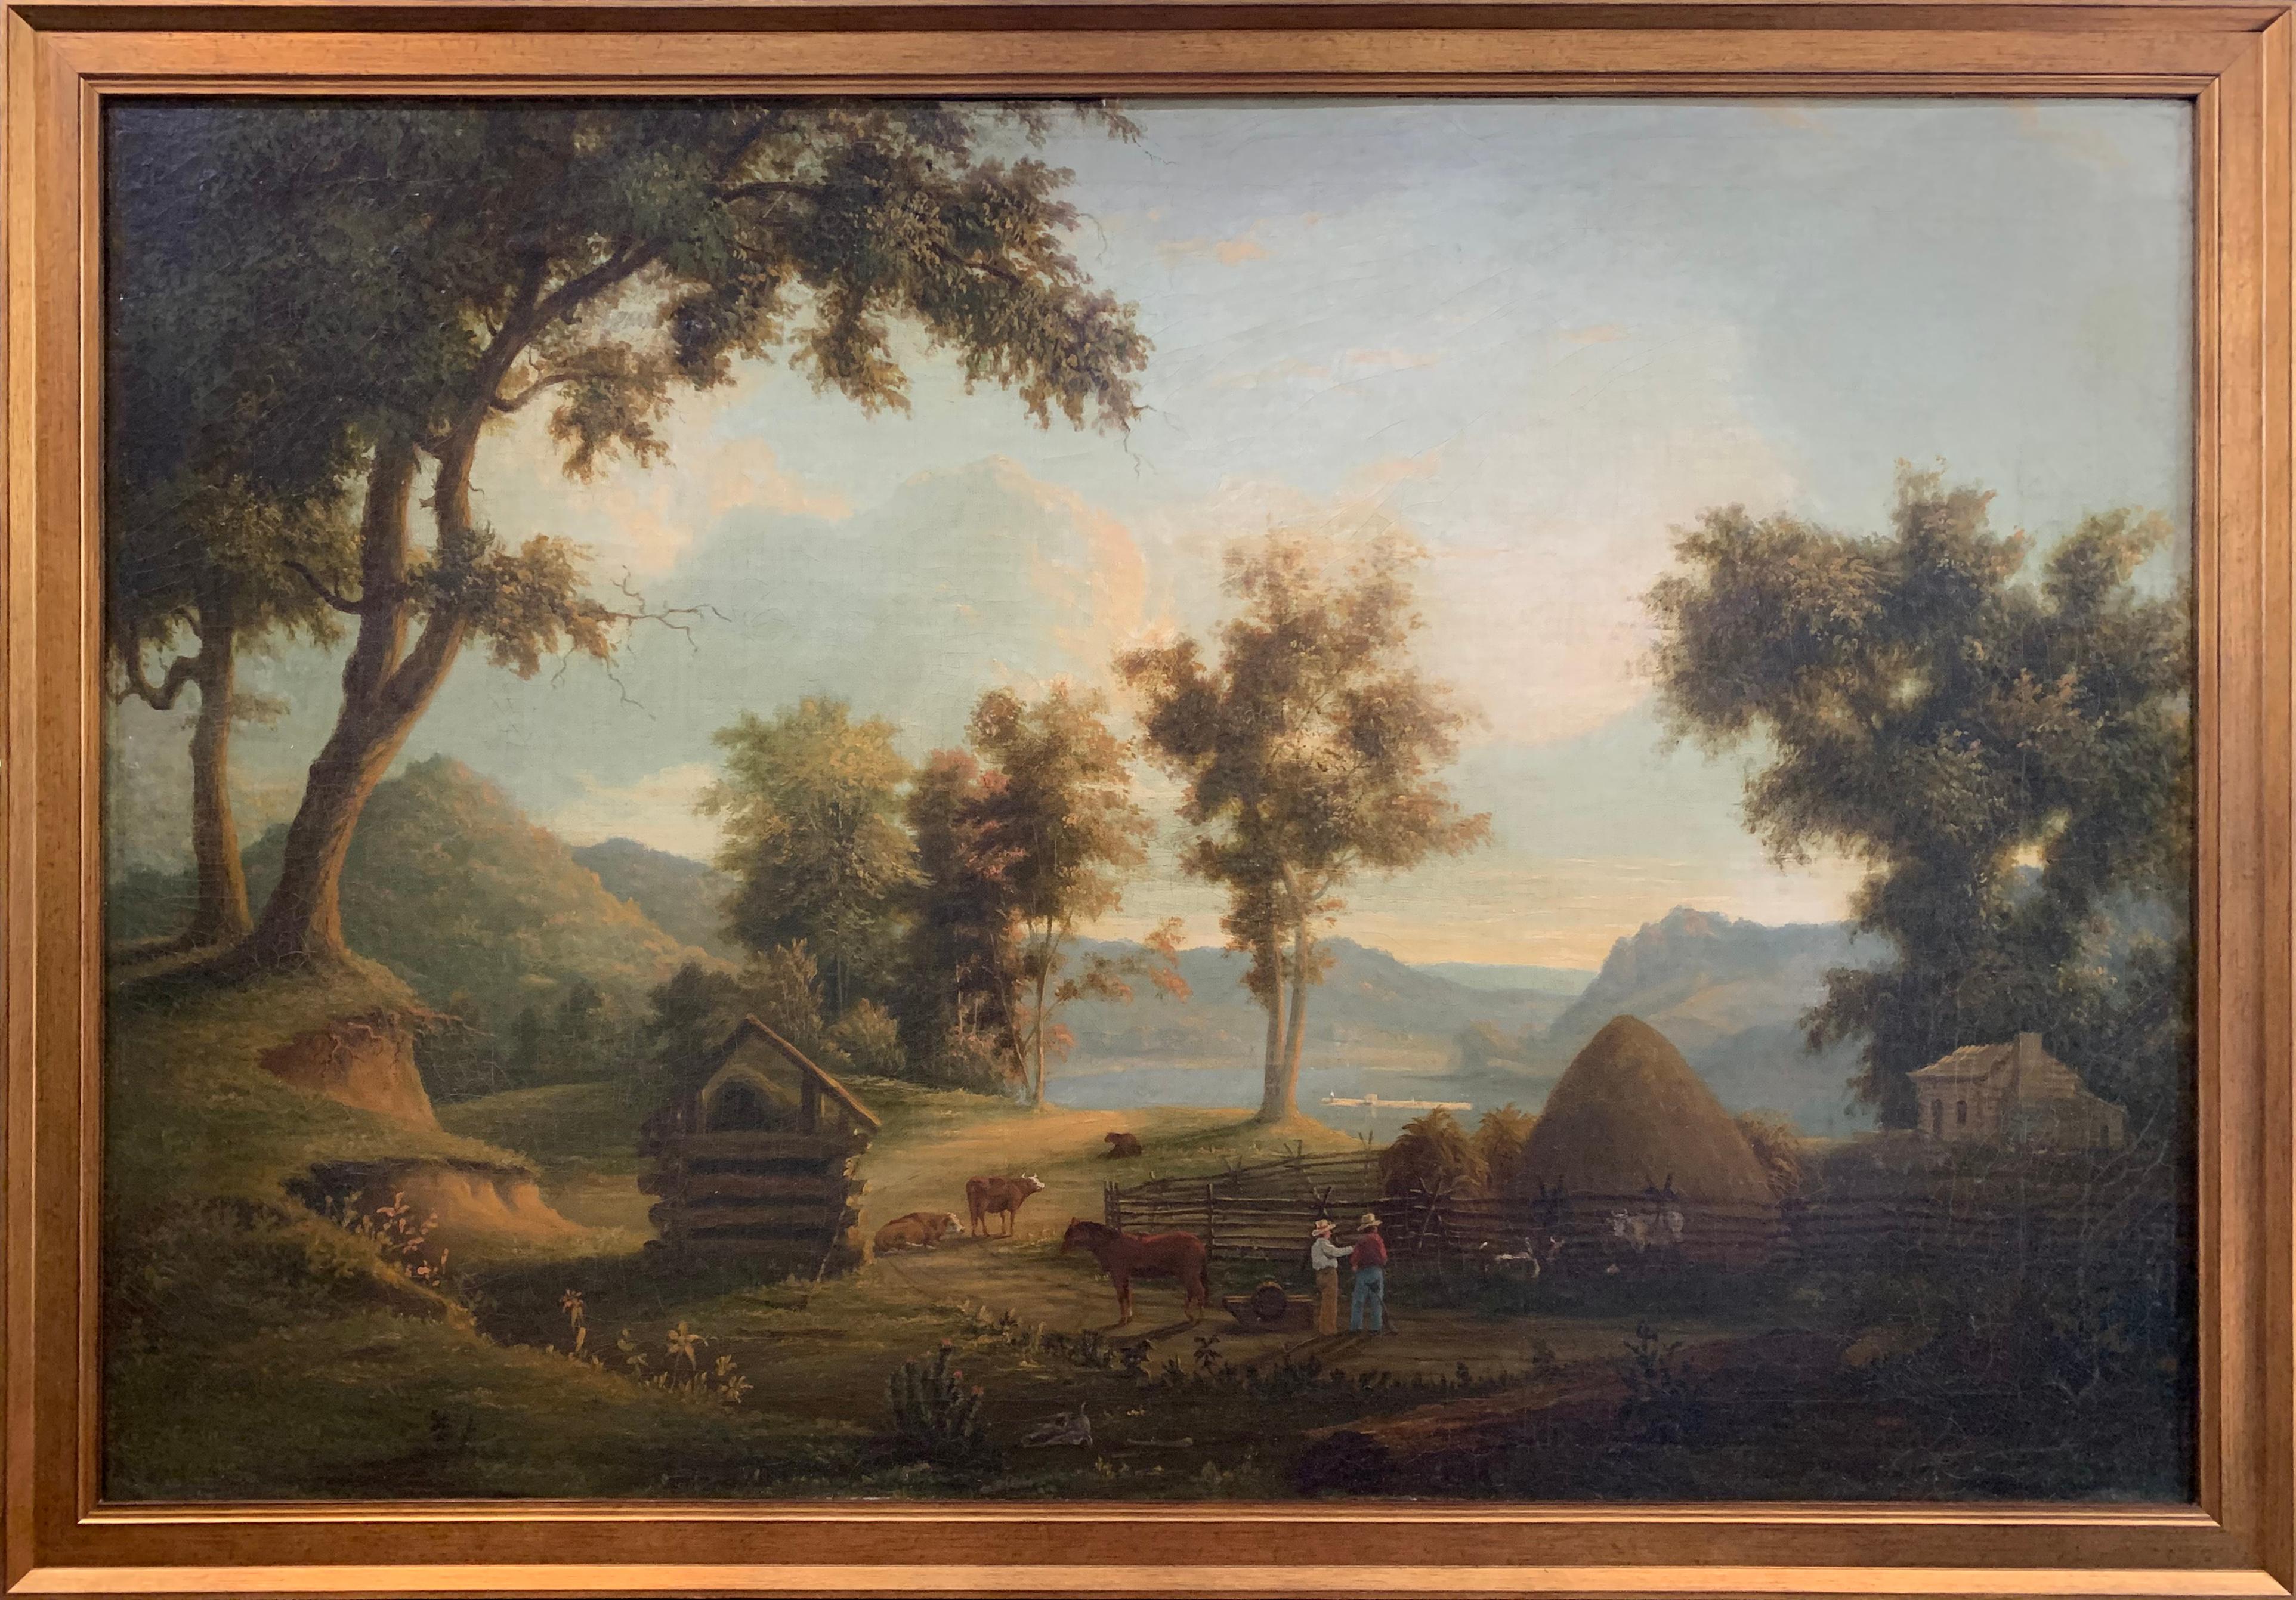 Hudson River School Landscape and Regional River Scene with Figures and Animals